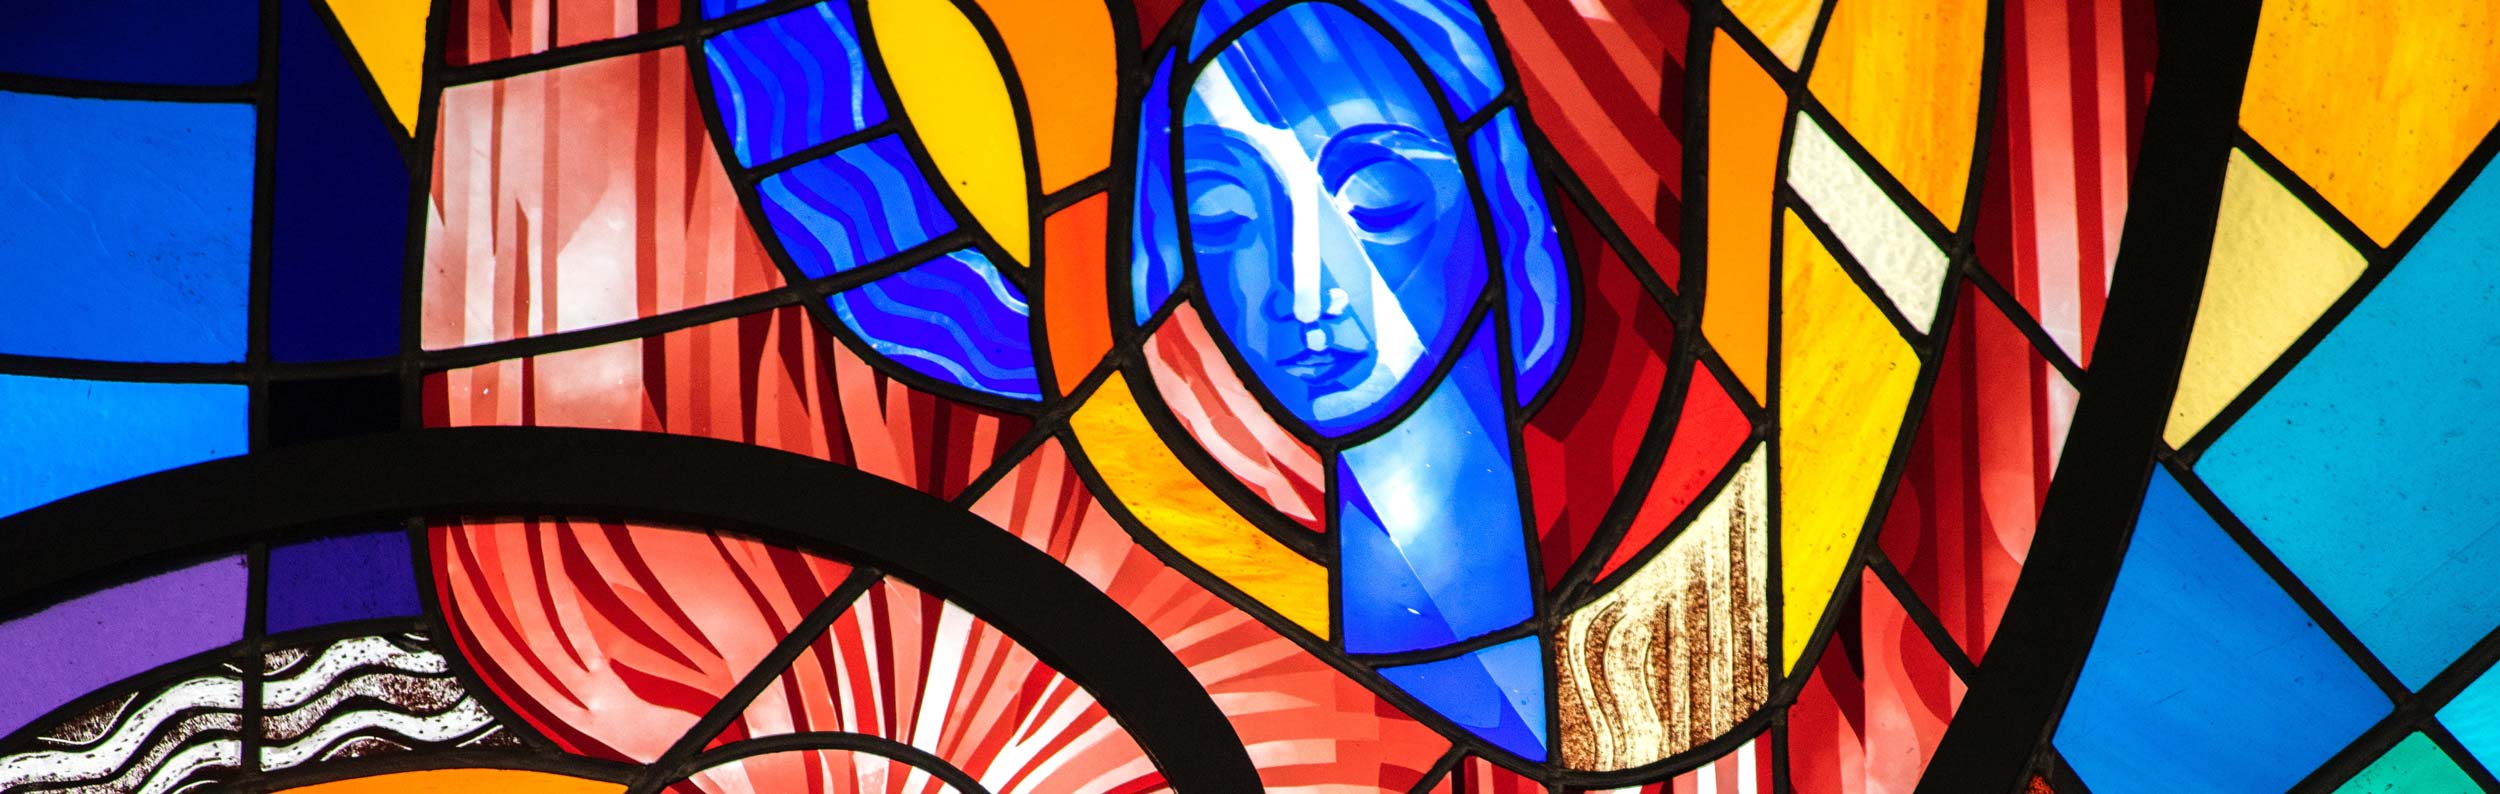 image of stain glass blue woman